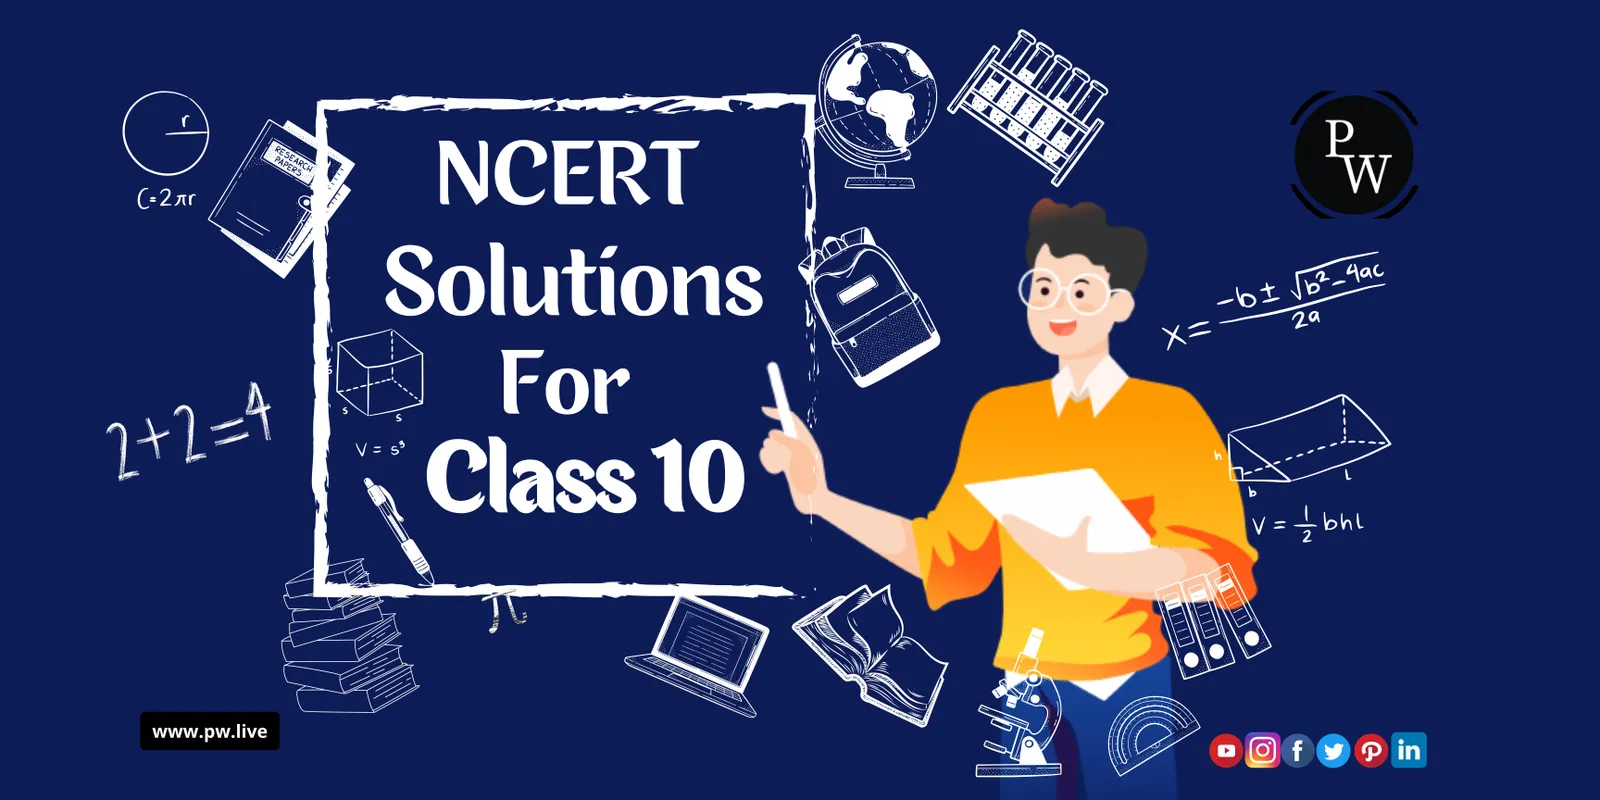 NCERT Solutions For Class 10 All Subjects|Physics Wallah